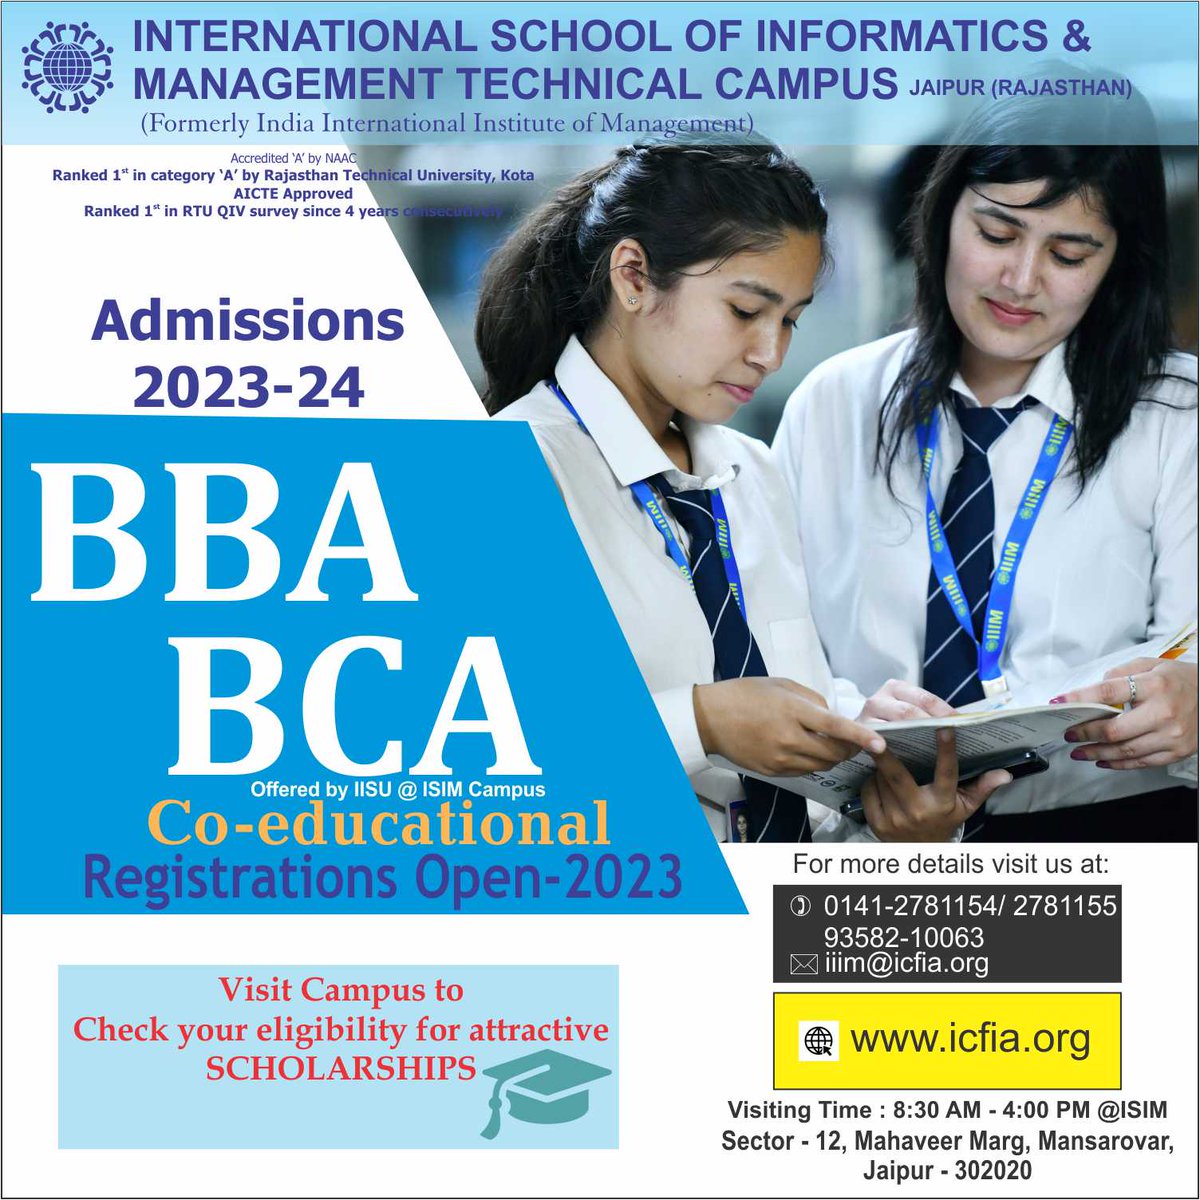 Visit us between (08:30 AM to 04:00 PM)
Reach us: 0141-2781154 / 0141-2781155
For inquiry :
lnkd.in/f7N3EVd

#AdmissionsOpen #admissions2023 - 24 #pgcourses #mba #MCA #ComputerApplications #CareerOpportunities #SoftwareEngineer #DatabaseAdministrator #NetworkAdministrator